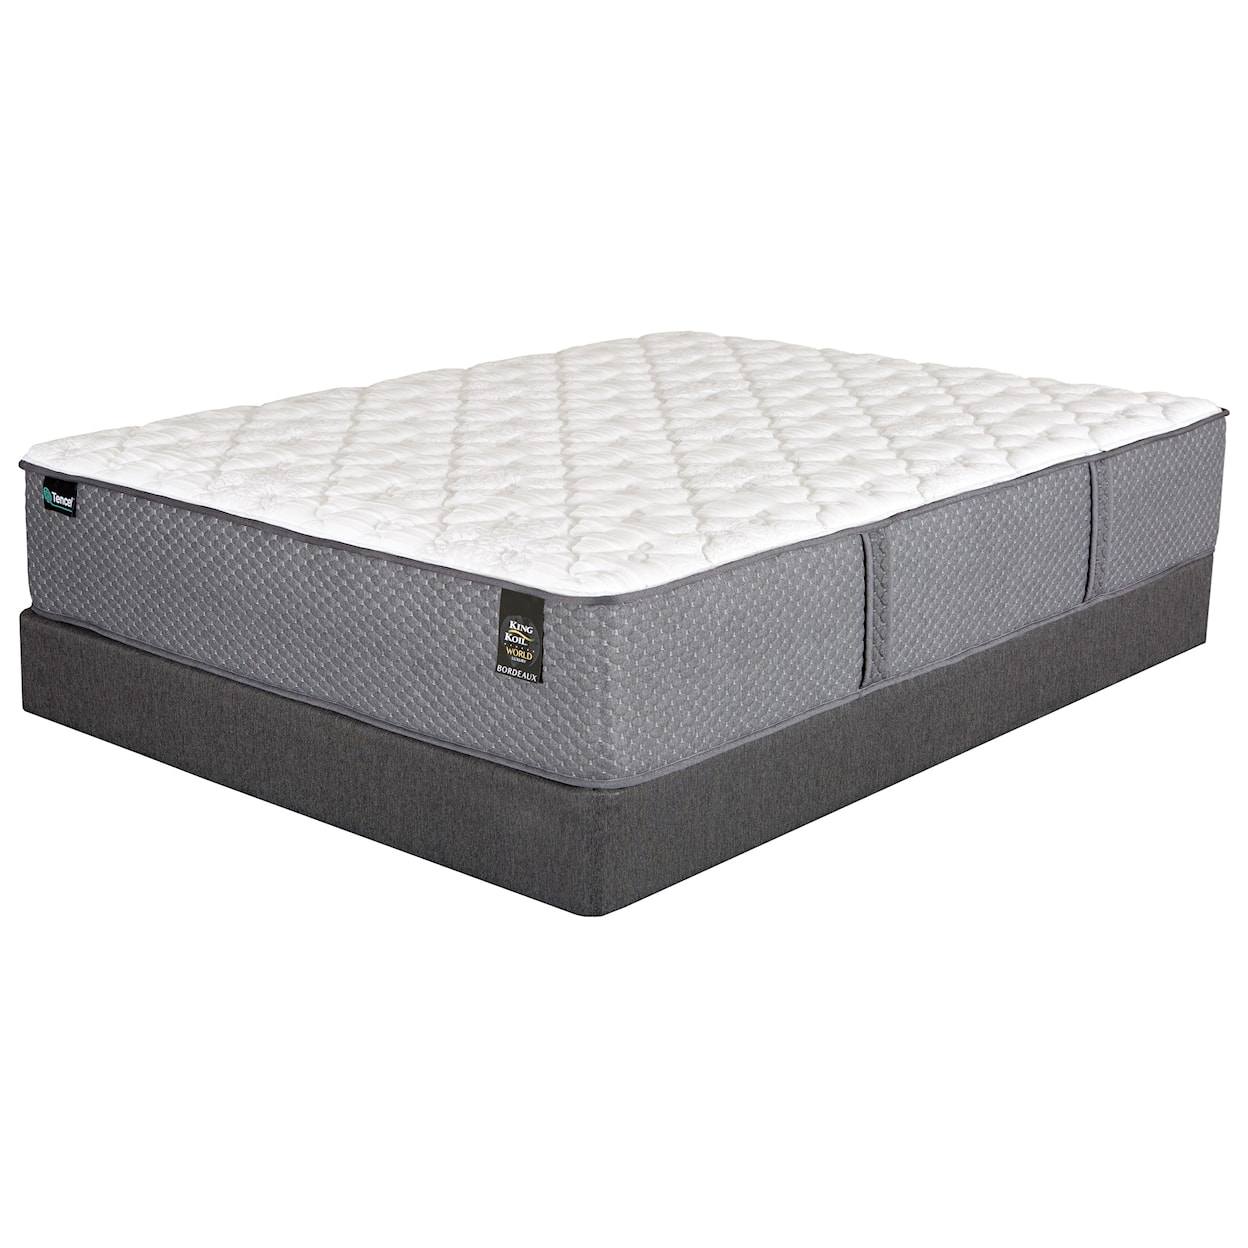 King Koil Beaumont EF Full Pocketed Coil Mattress Set